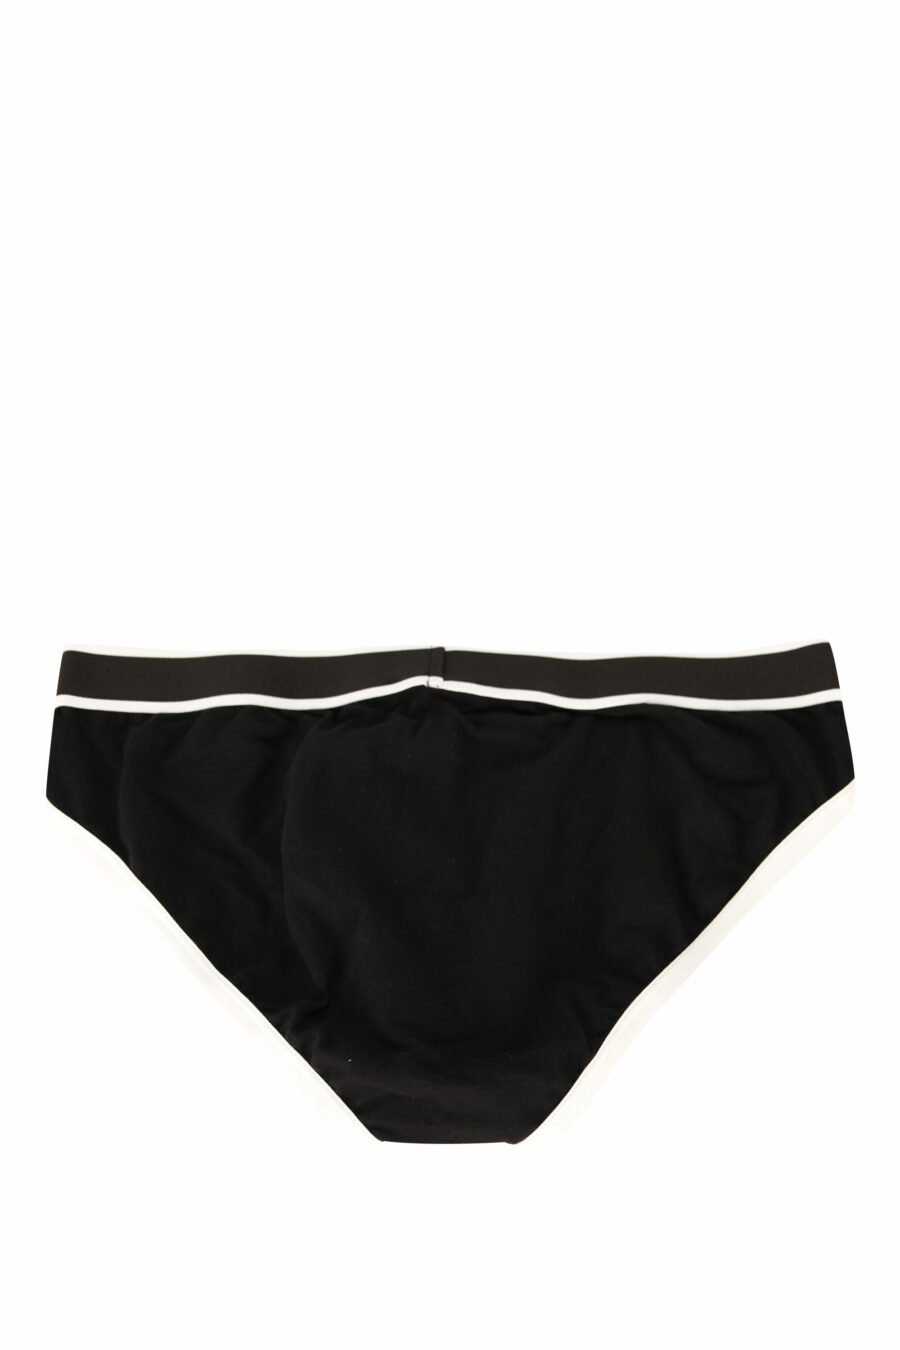 Black briefs with white line and logo - 8032674405272 1